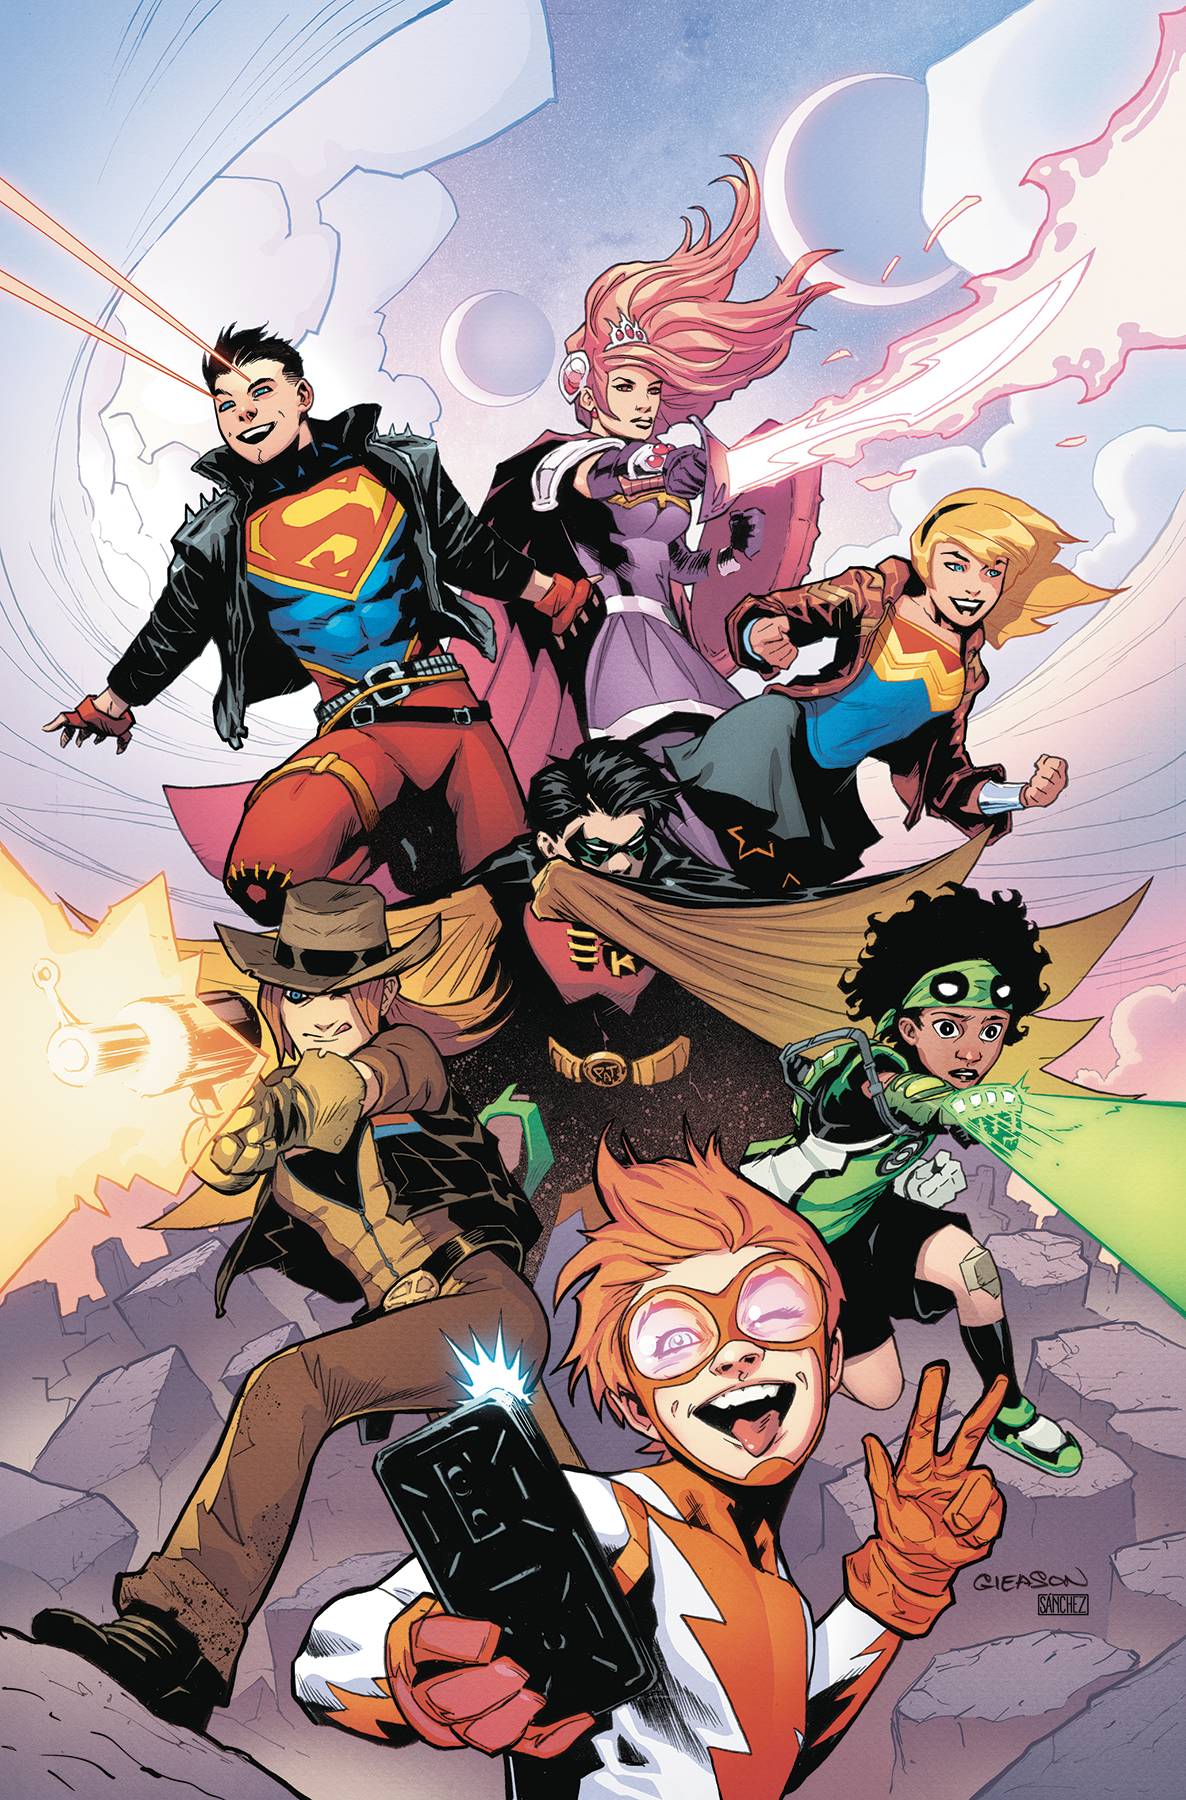 03/06/2019 YOUNG JUSTICE #3